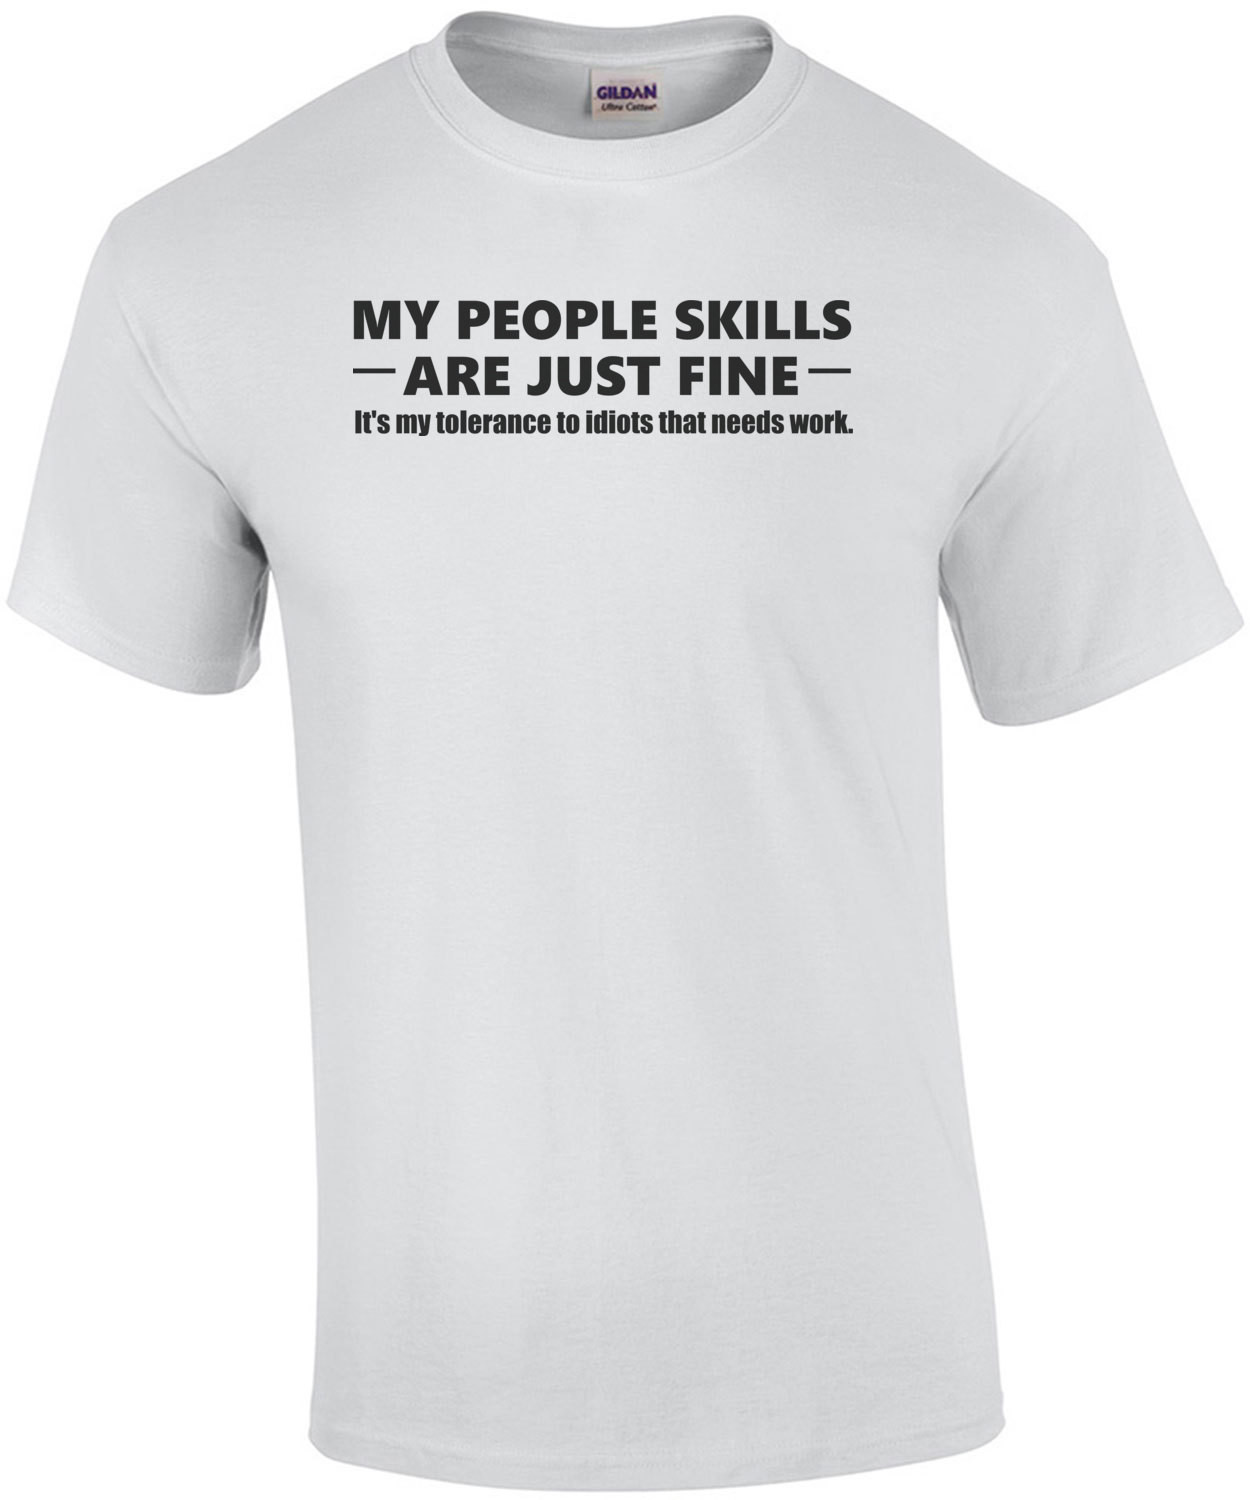 My people skills are just fine. It's my tolerance to idiots that needs work. - funny sarcastic t-shirt